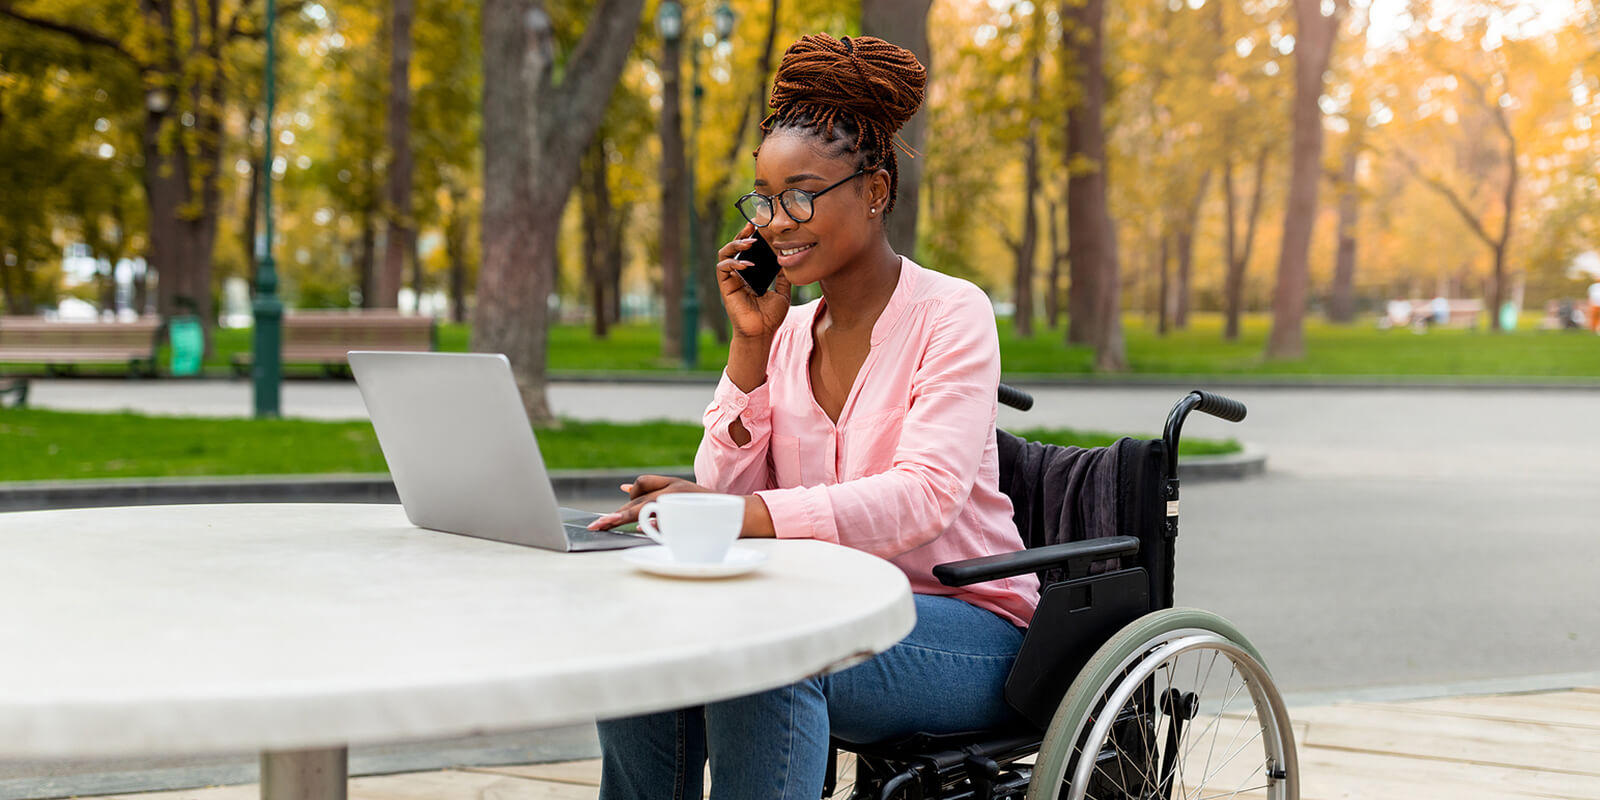 Limits on Working Hours While on Disability